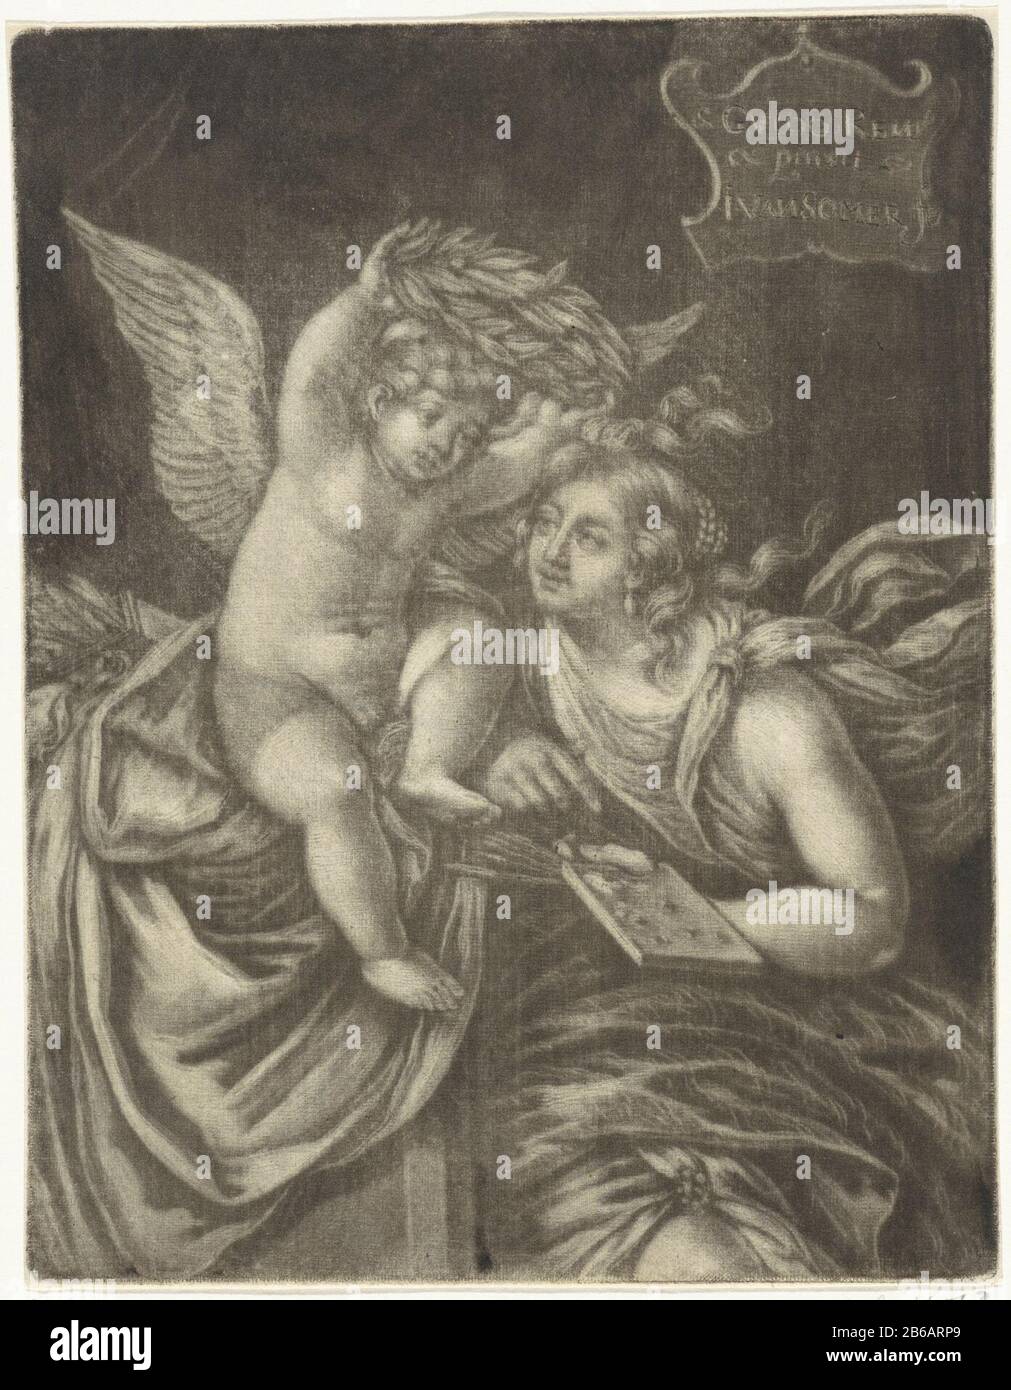 Amor crowns the personification of the Painting Amor crowns the personification of Painting Object Type: picture Item number: RP-P-1909-130Catalogusreferentie: Hollstein Dutch 38 Inscriptions / Brands: collector's mark, verso, stamped: Lugt 2228 Manufacturer : printmaker Jan van Somer (listed on object ) to painting by: Guido Reni (indicated on object) Date: 1655 - 1700 Physical characteristics: mezzotint material: paper Technique: mezzotint dimensions: plate edge: h 192 mm × W 147 mm Subject: symbolic representations, ALLEGORIES and emblems  the monumental arts'Pictura ', symbolic representa Stock Photo